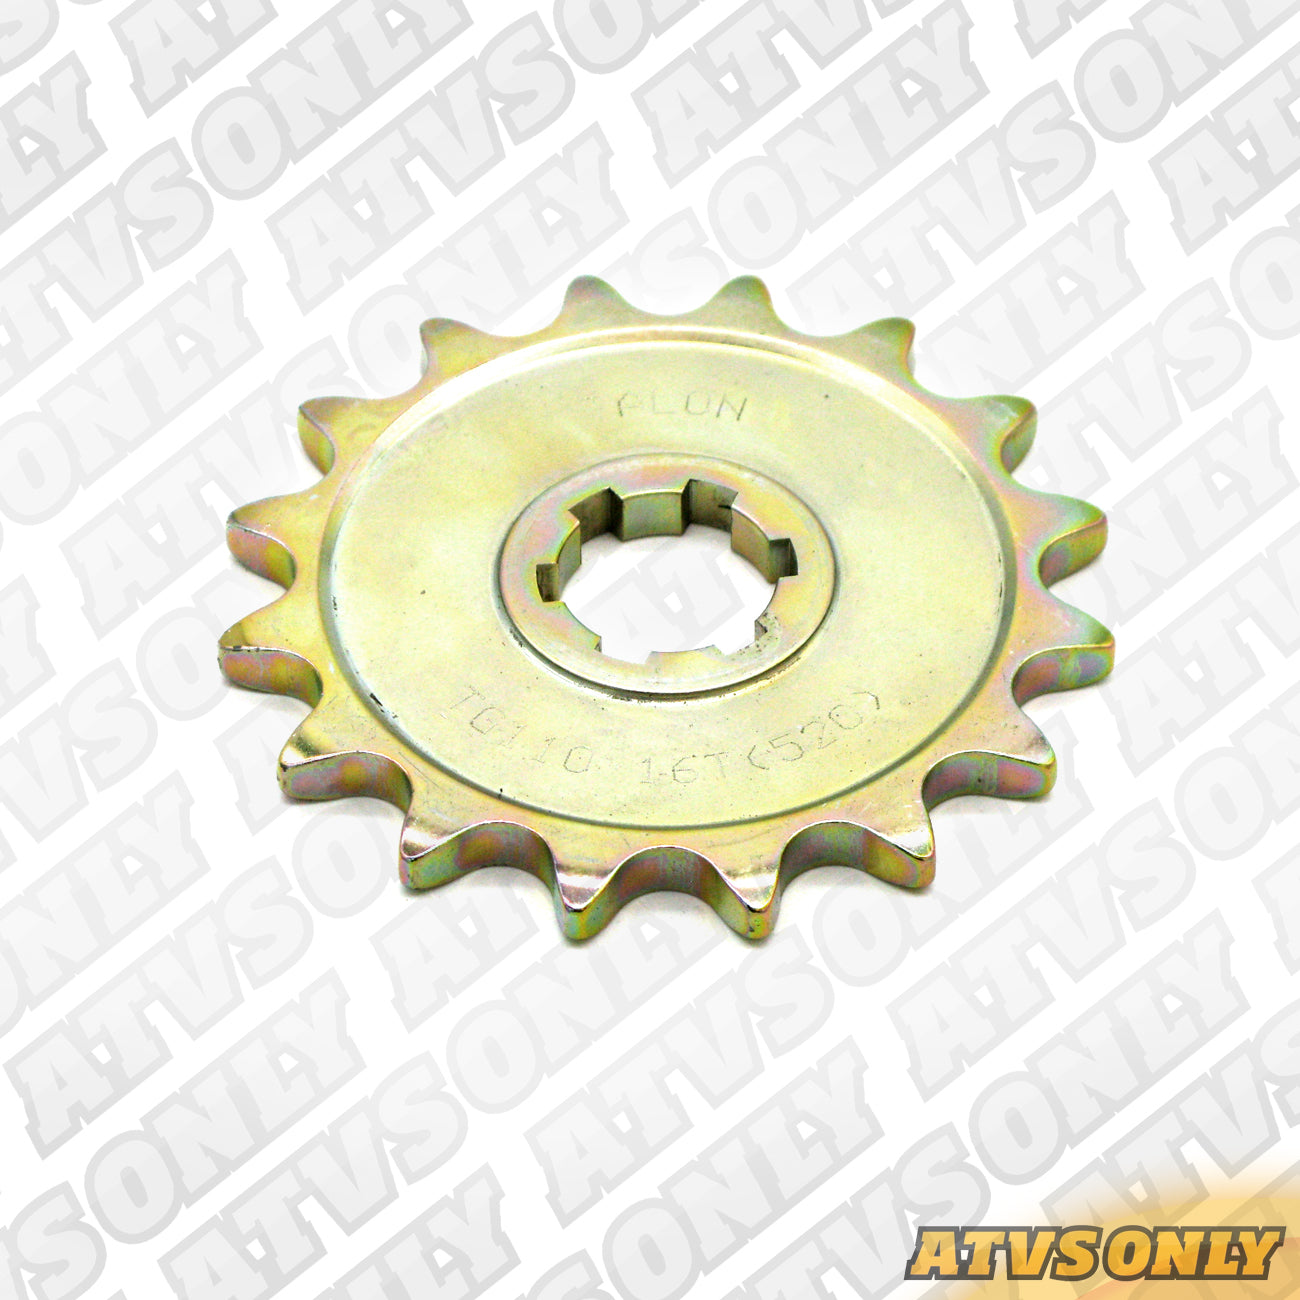 Front Sprockets for Yamaha Applications